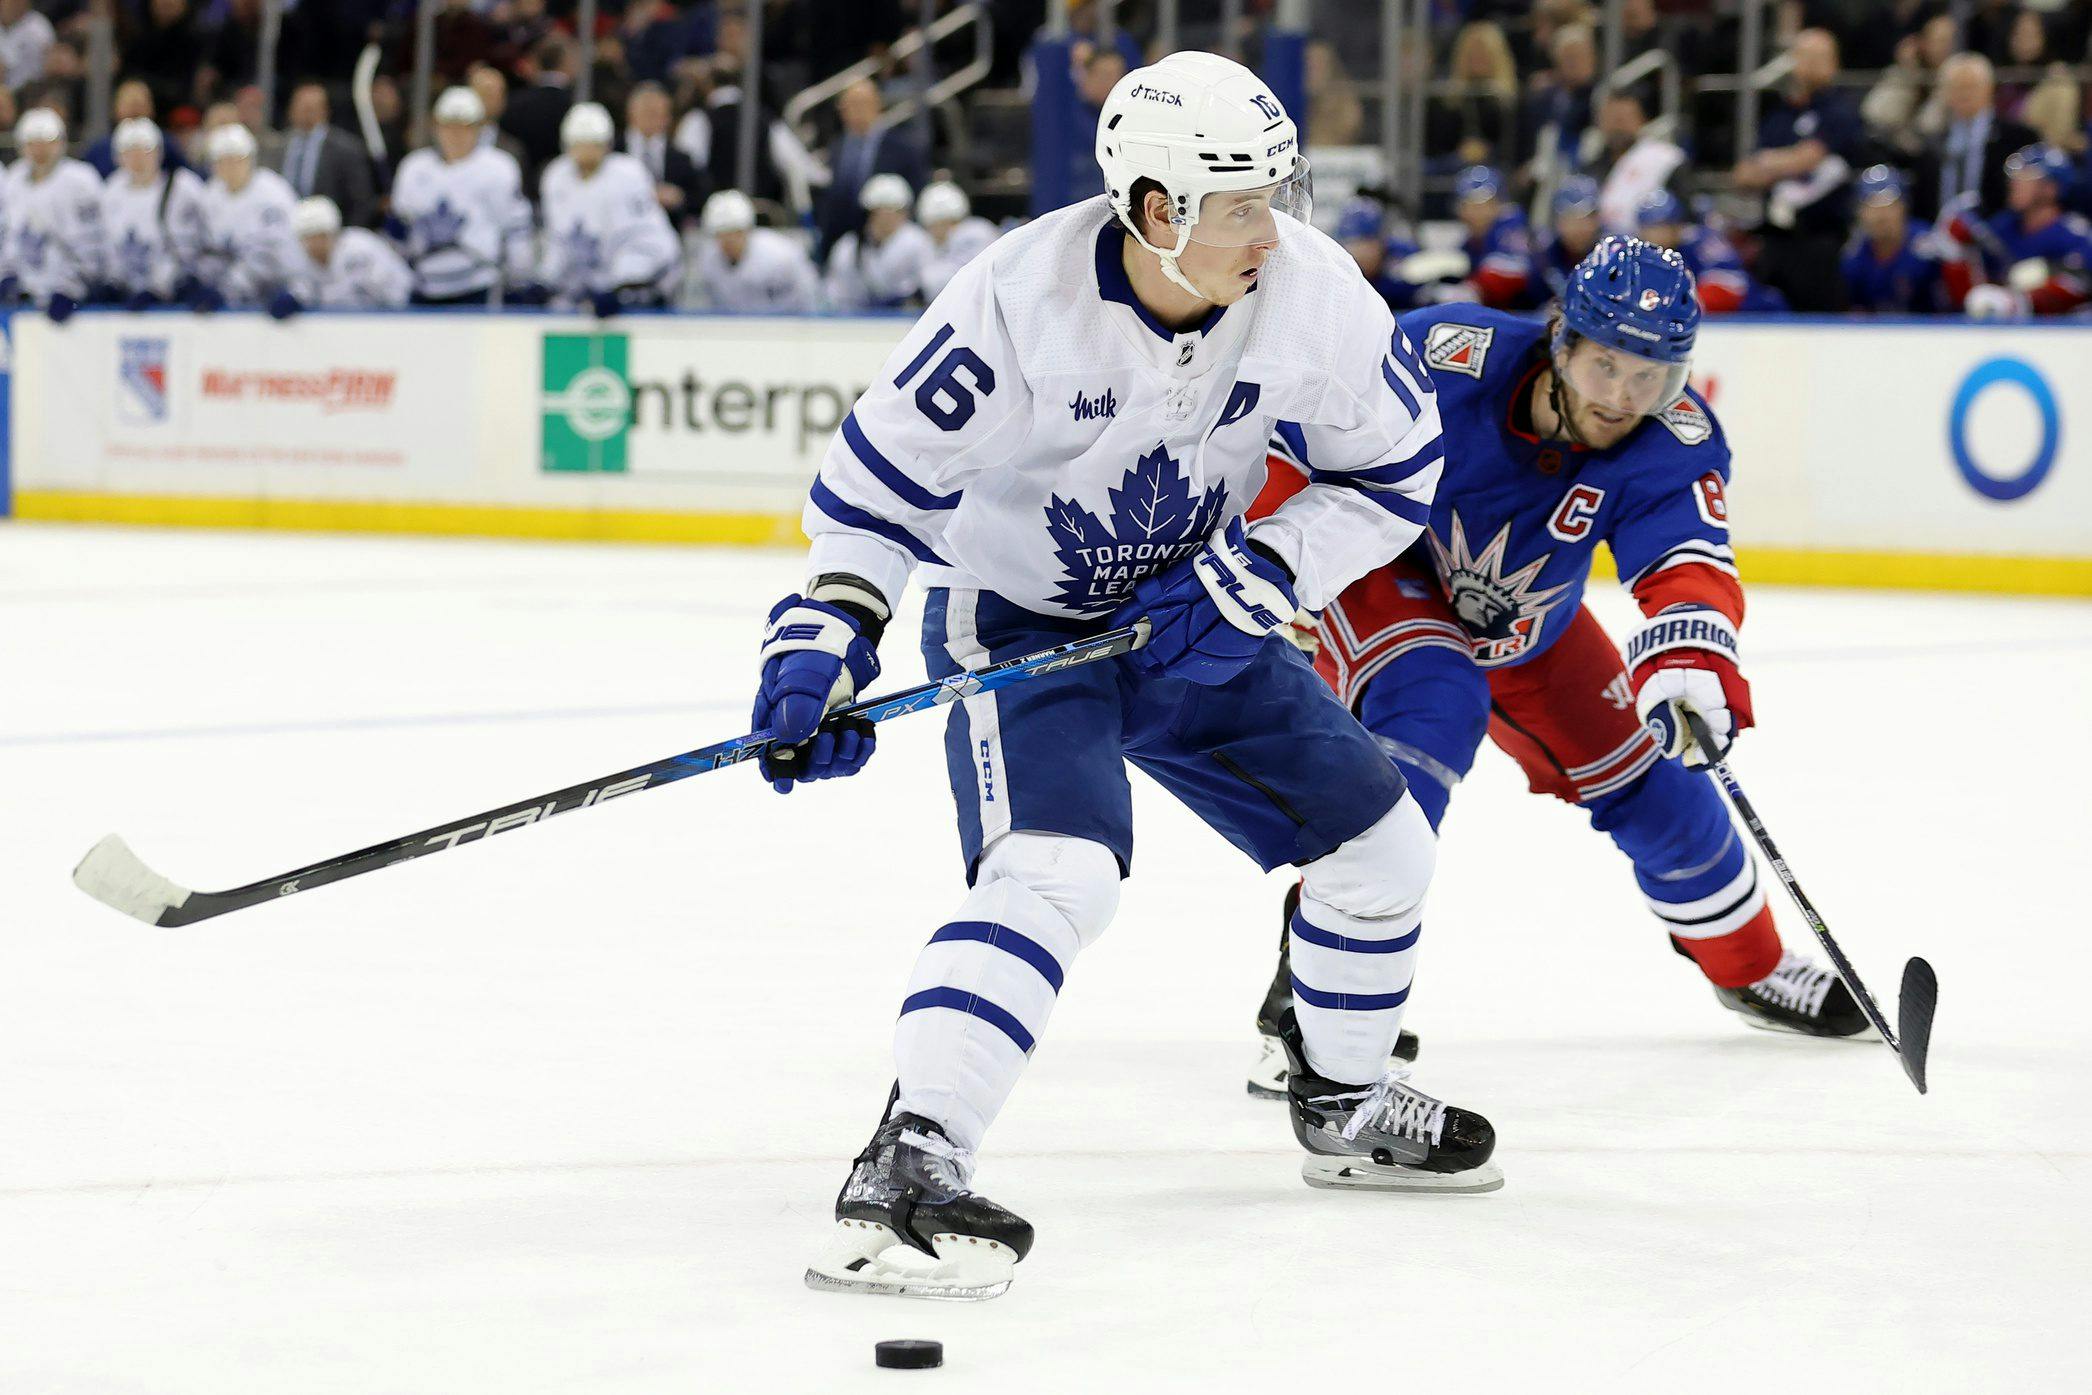 Toronto Maple Leafs: How Does Mitch Marner's Streak Compare? - Page 2